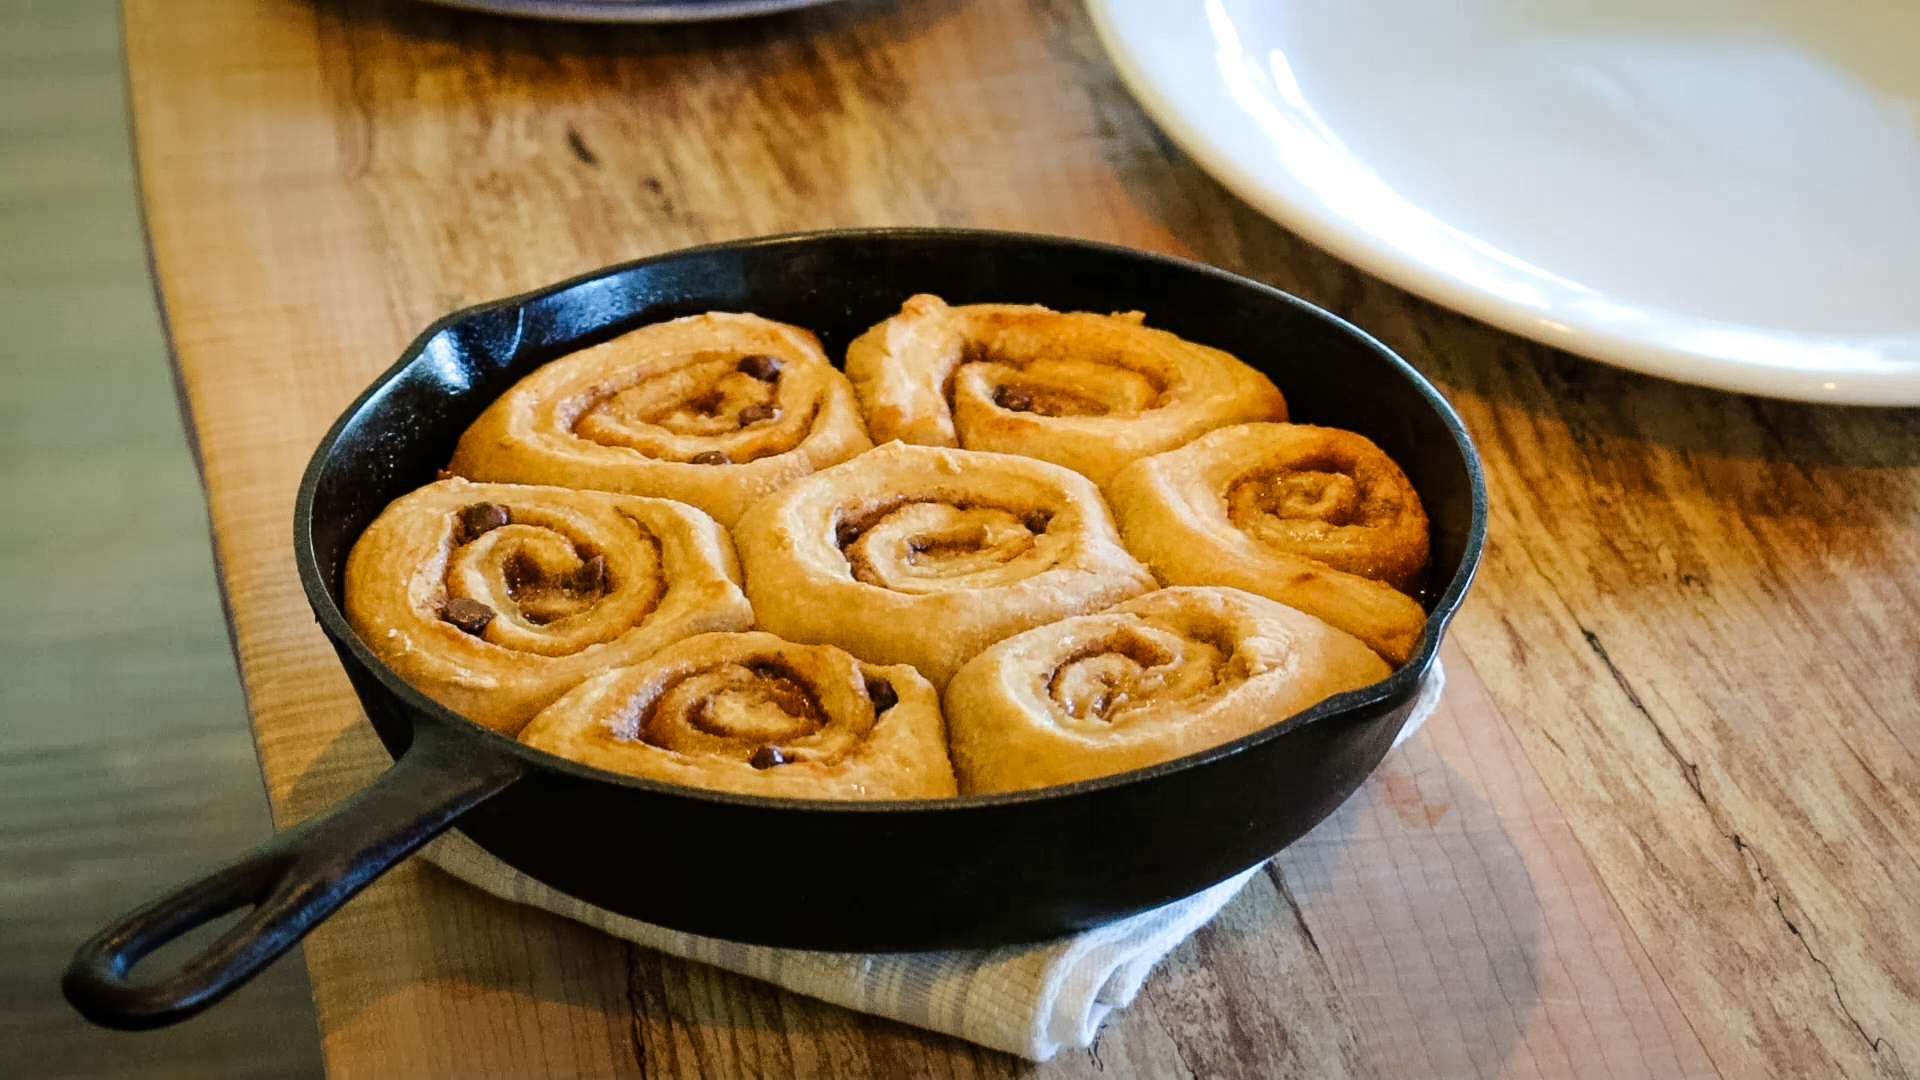 Chocolate caramel cinnamon rolls baked in a cast iron pan sitting on a table.